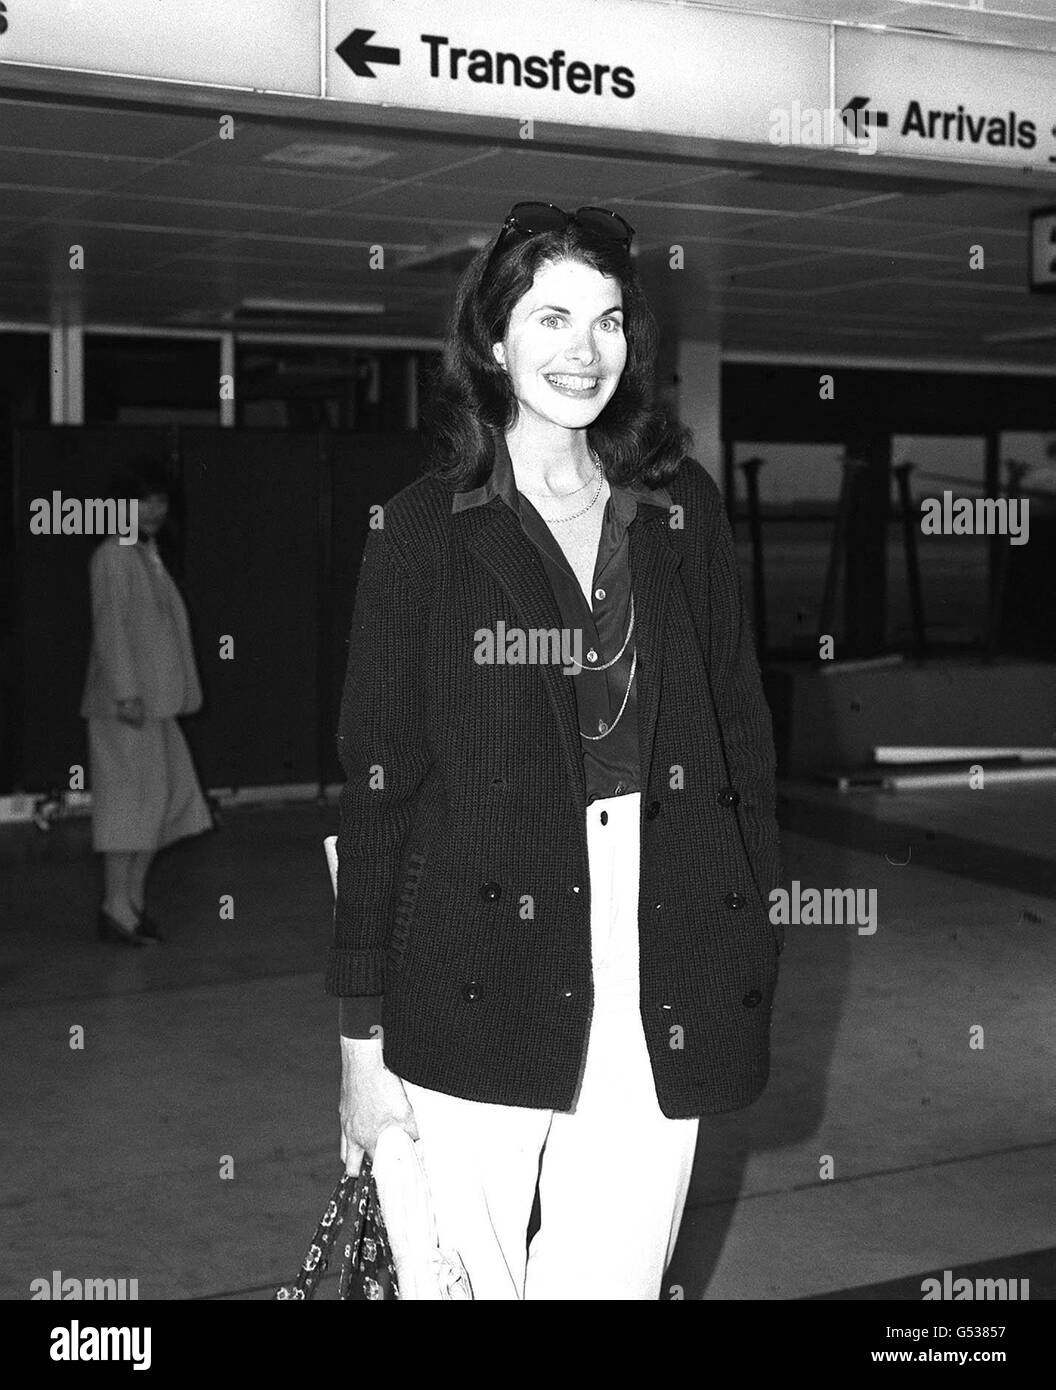 Sherry Lansing,35, the first woman to head a major film studio when she was appointed President of 20th Century Fox , at London's Heathrow Airport, when she returned to the United States after attending the Cannes Film Festival Stock Photo